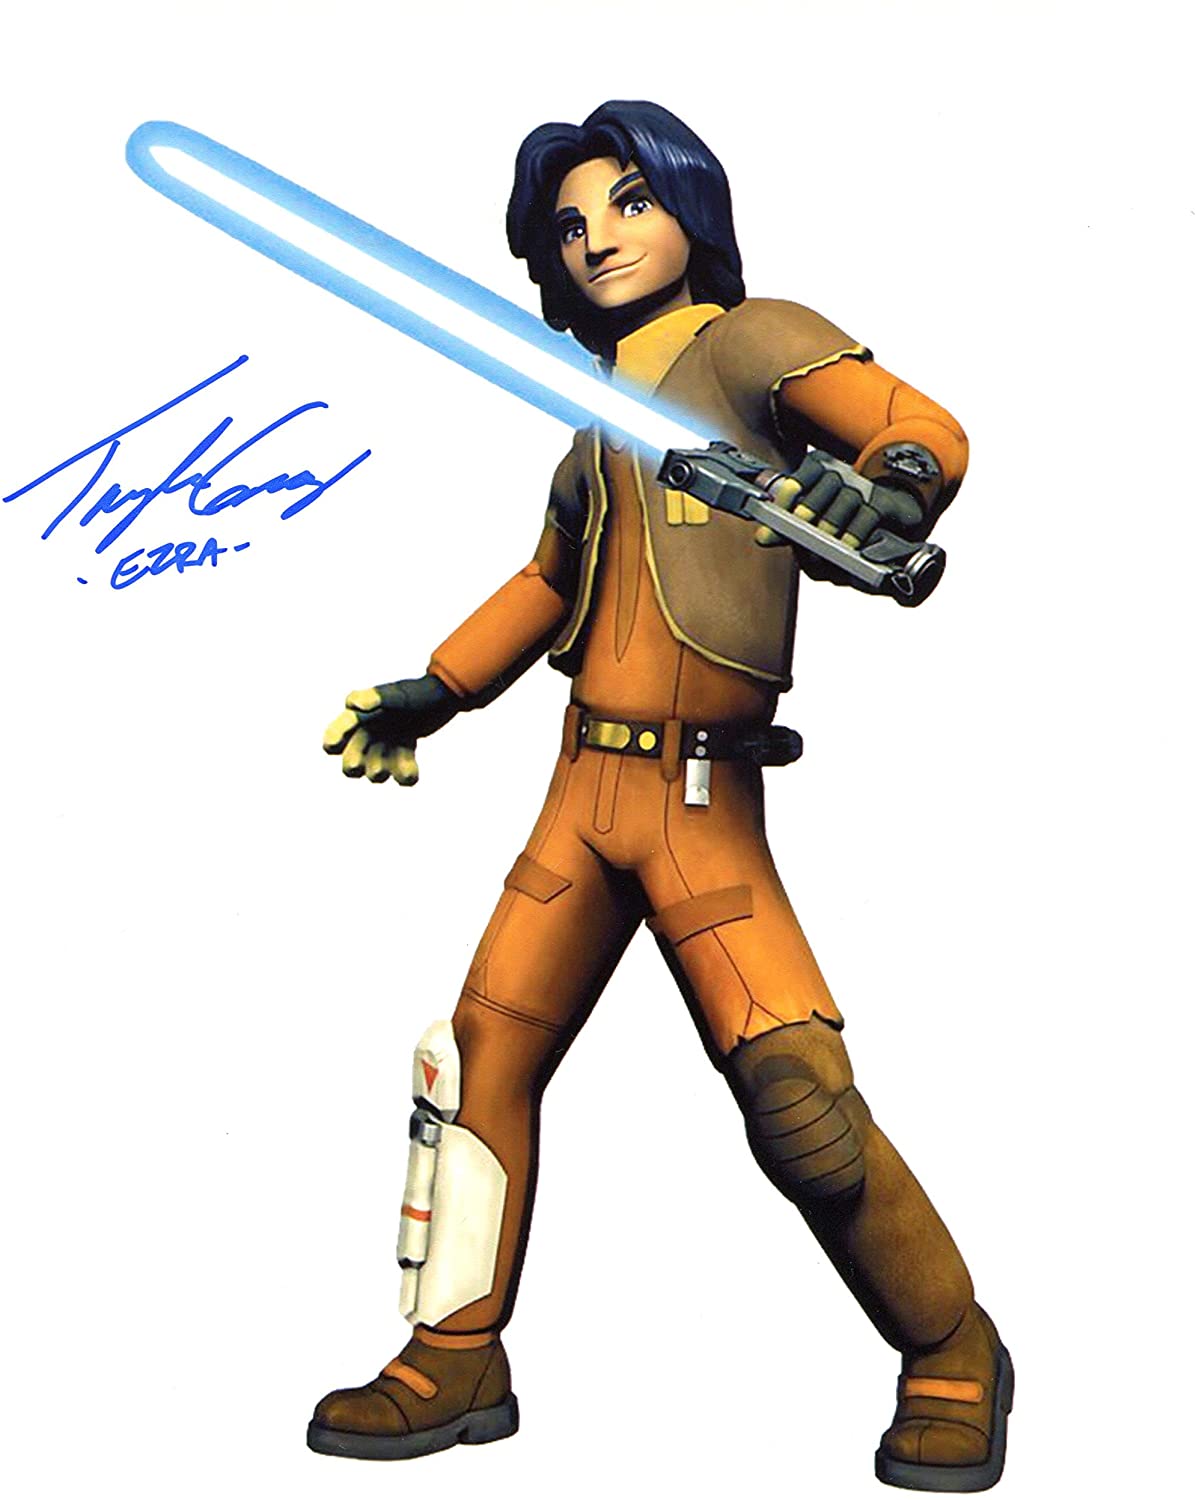 Taylor Gray Signed / Autographed Star wars Rebels wars 8x10 Glossy Photo of Ezra Bridger Includes Starleague Sports Certification, Proof Of signing and Cataloged Number with COA. Entertainment Autograph Original. Ezra